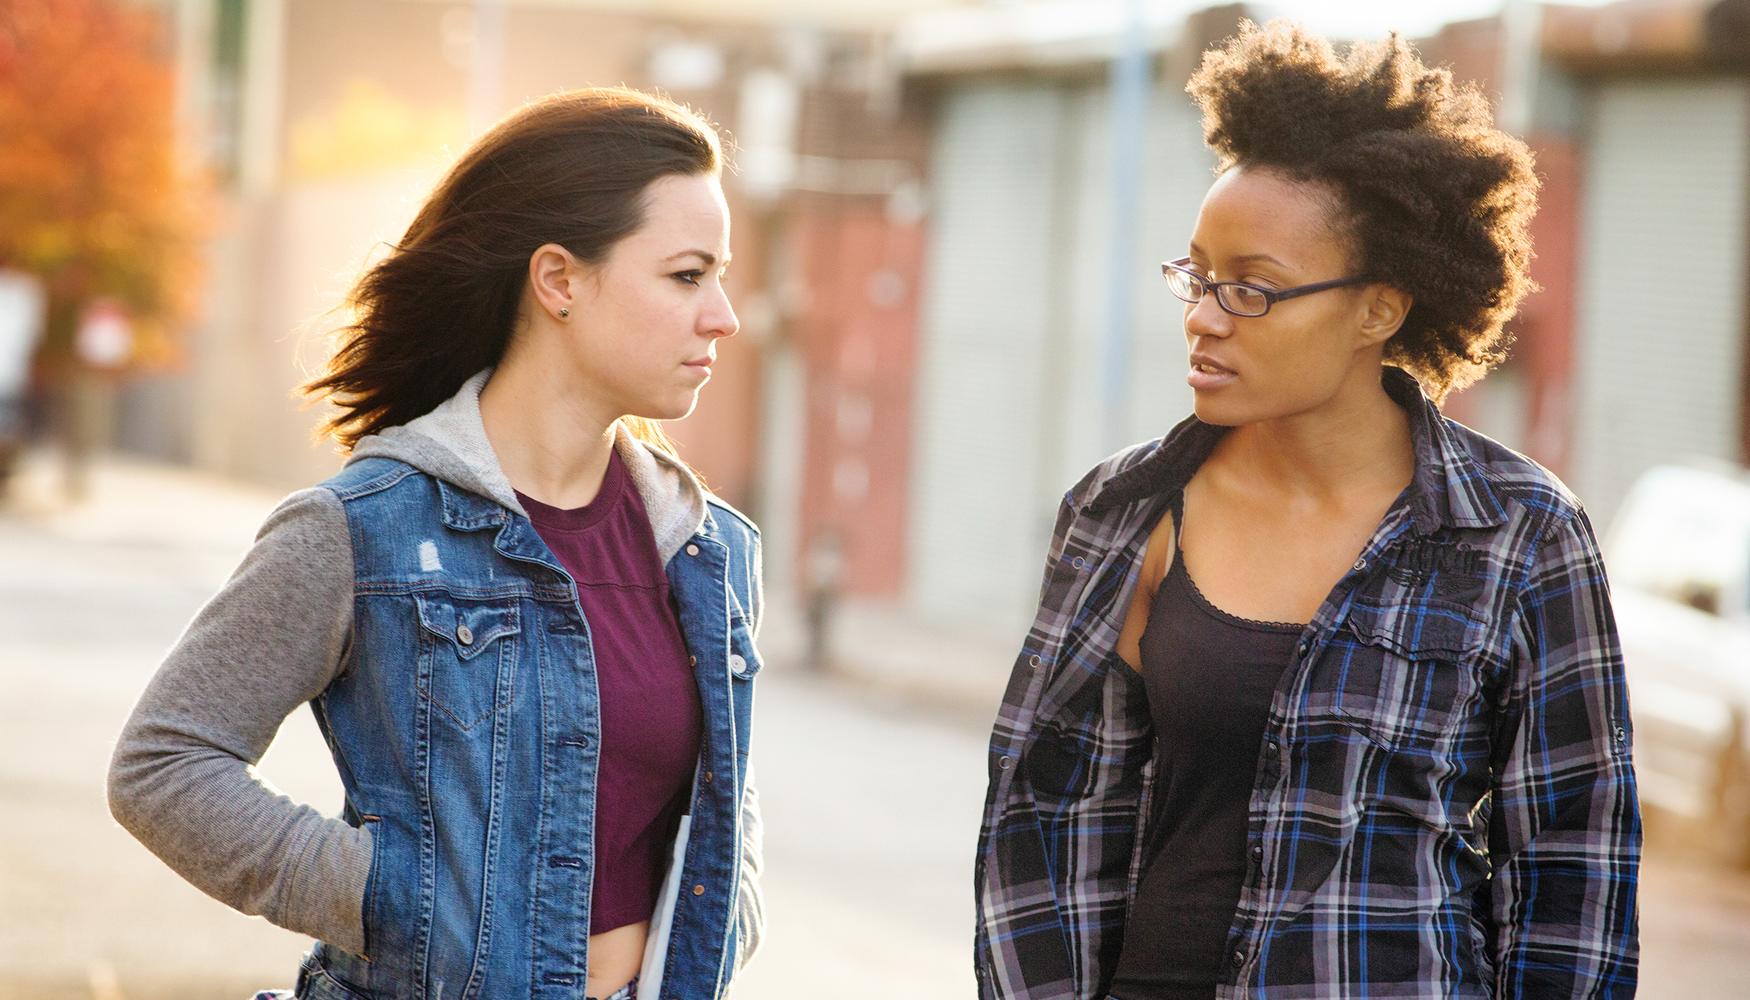 A photo of two women who appear to be involved in street outreach services.